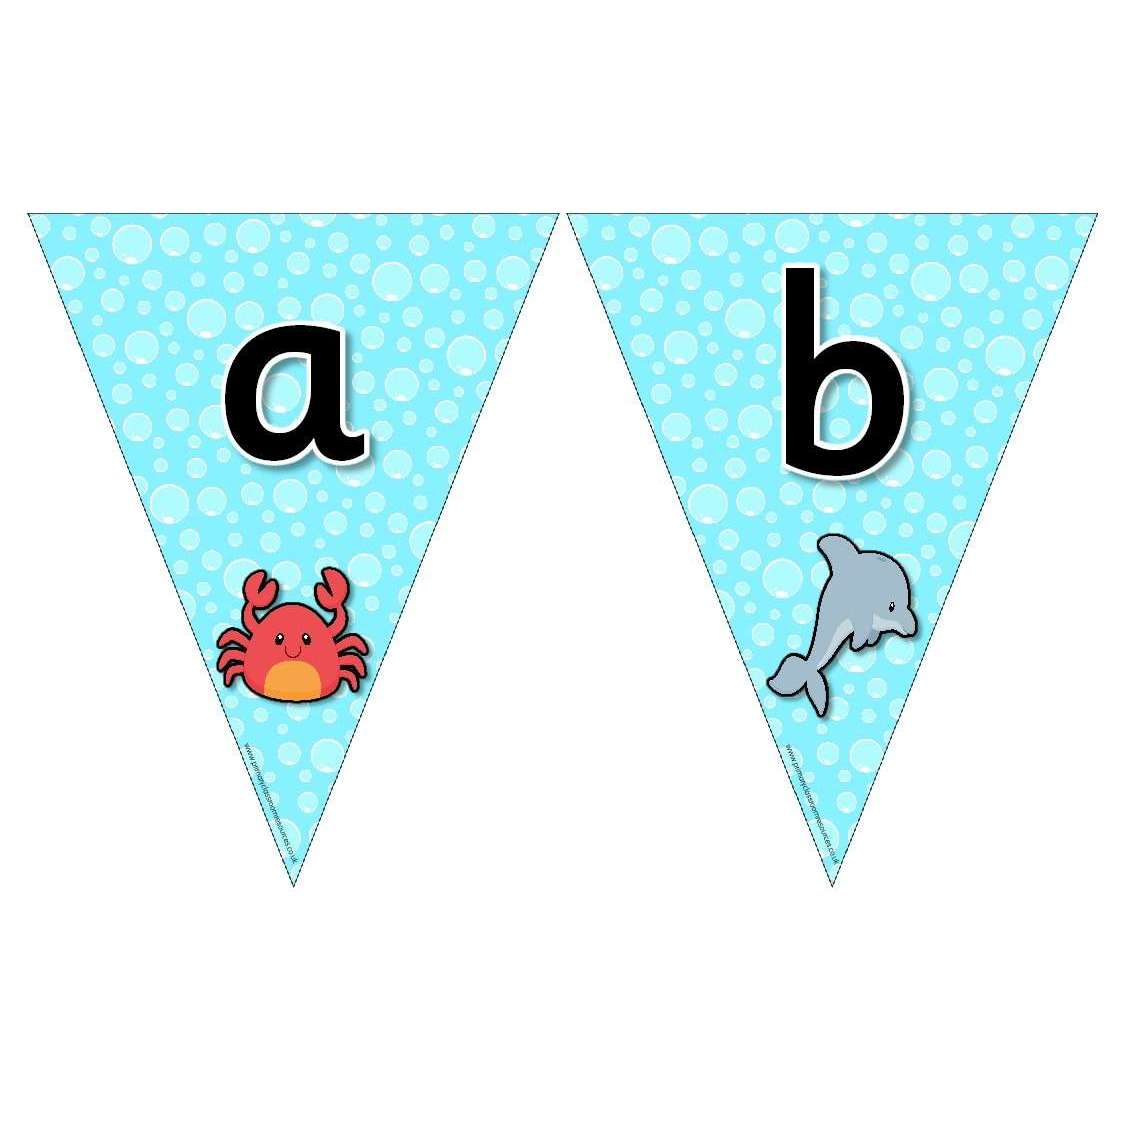 Under the Sea Themed Alphabet Bunting:Primary Classroom Resources